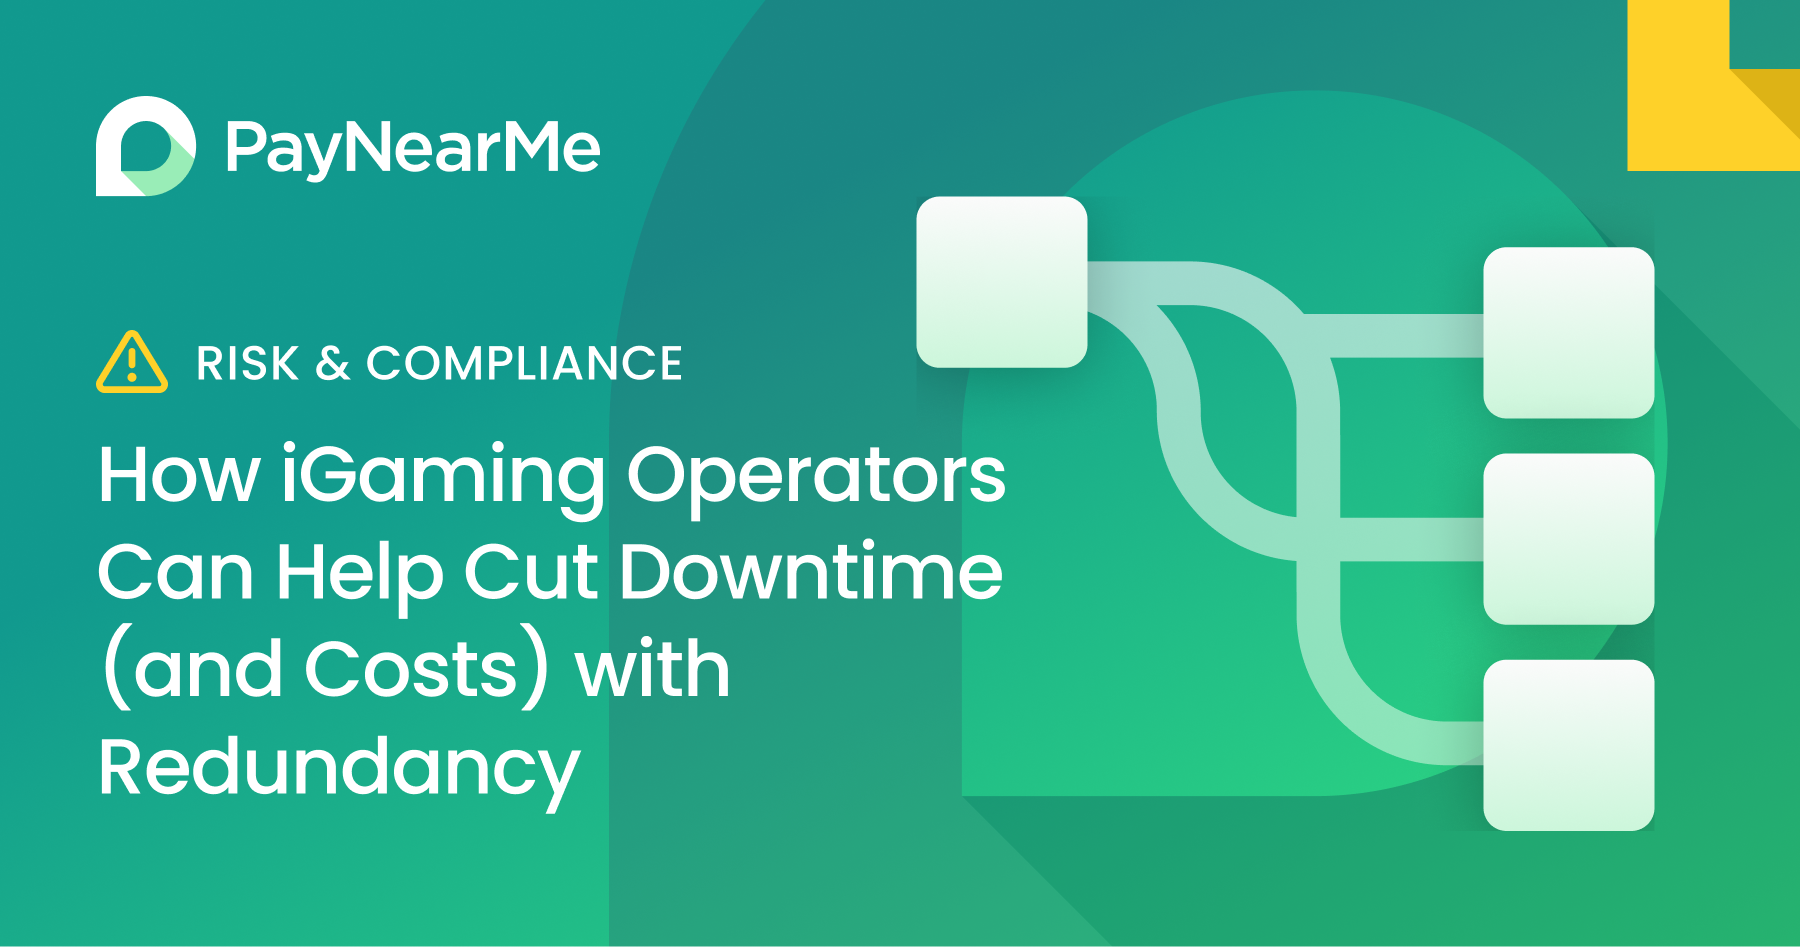 How iGaming Operators Can Help Cut Downtime (and Costs) with Redundancy